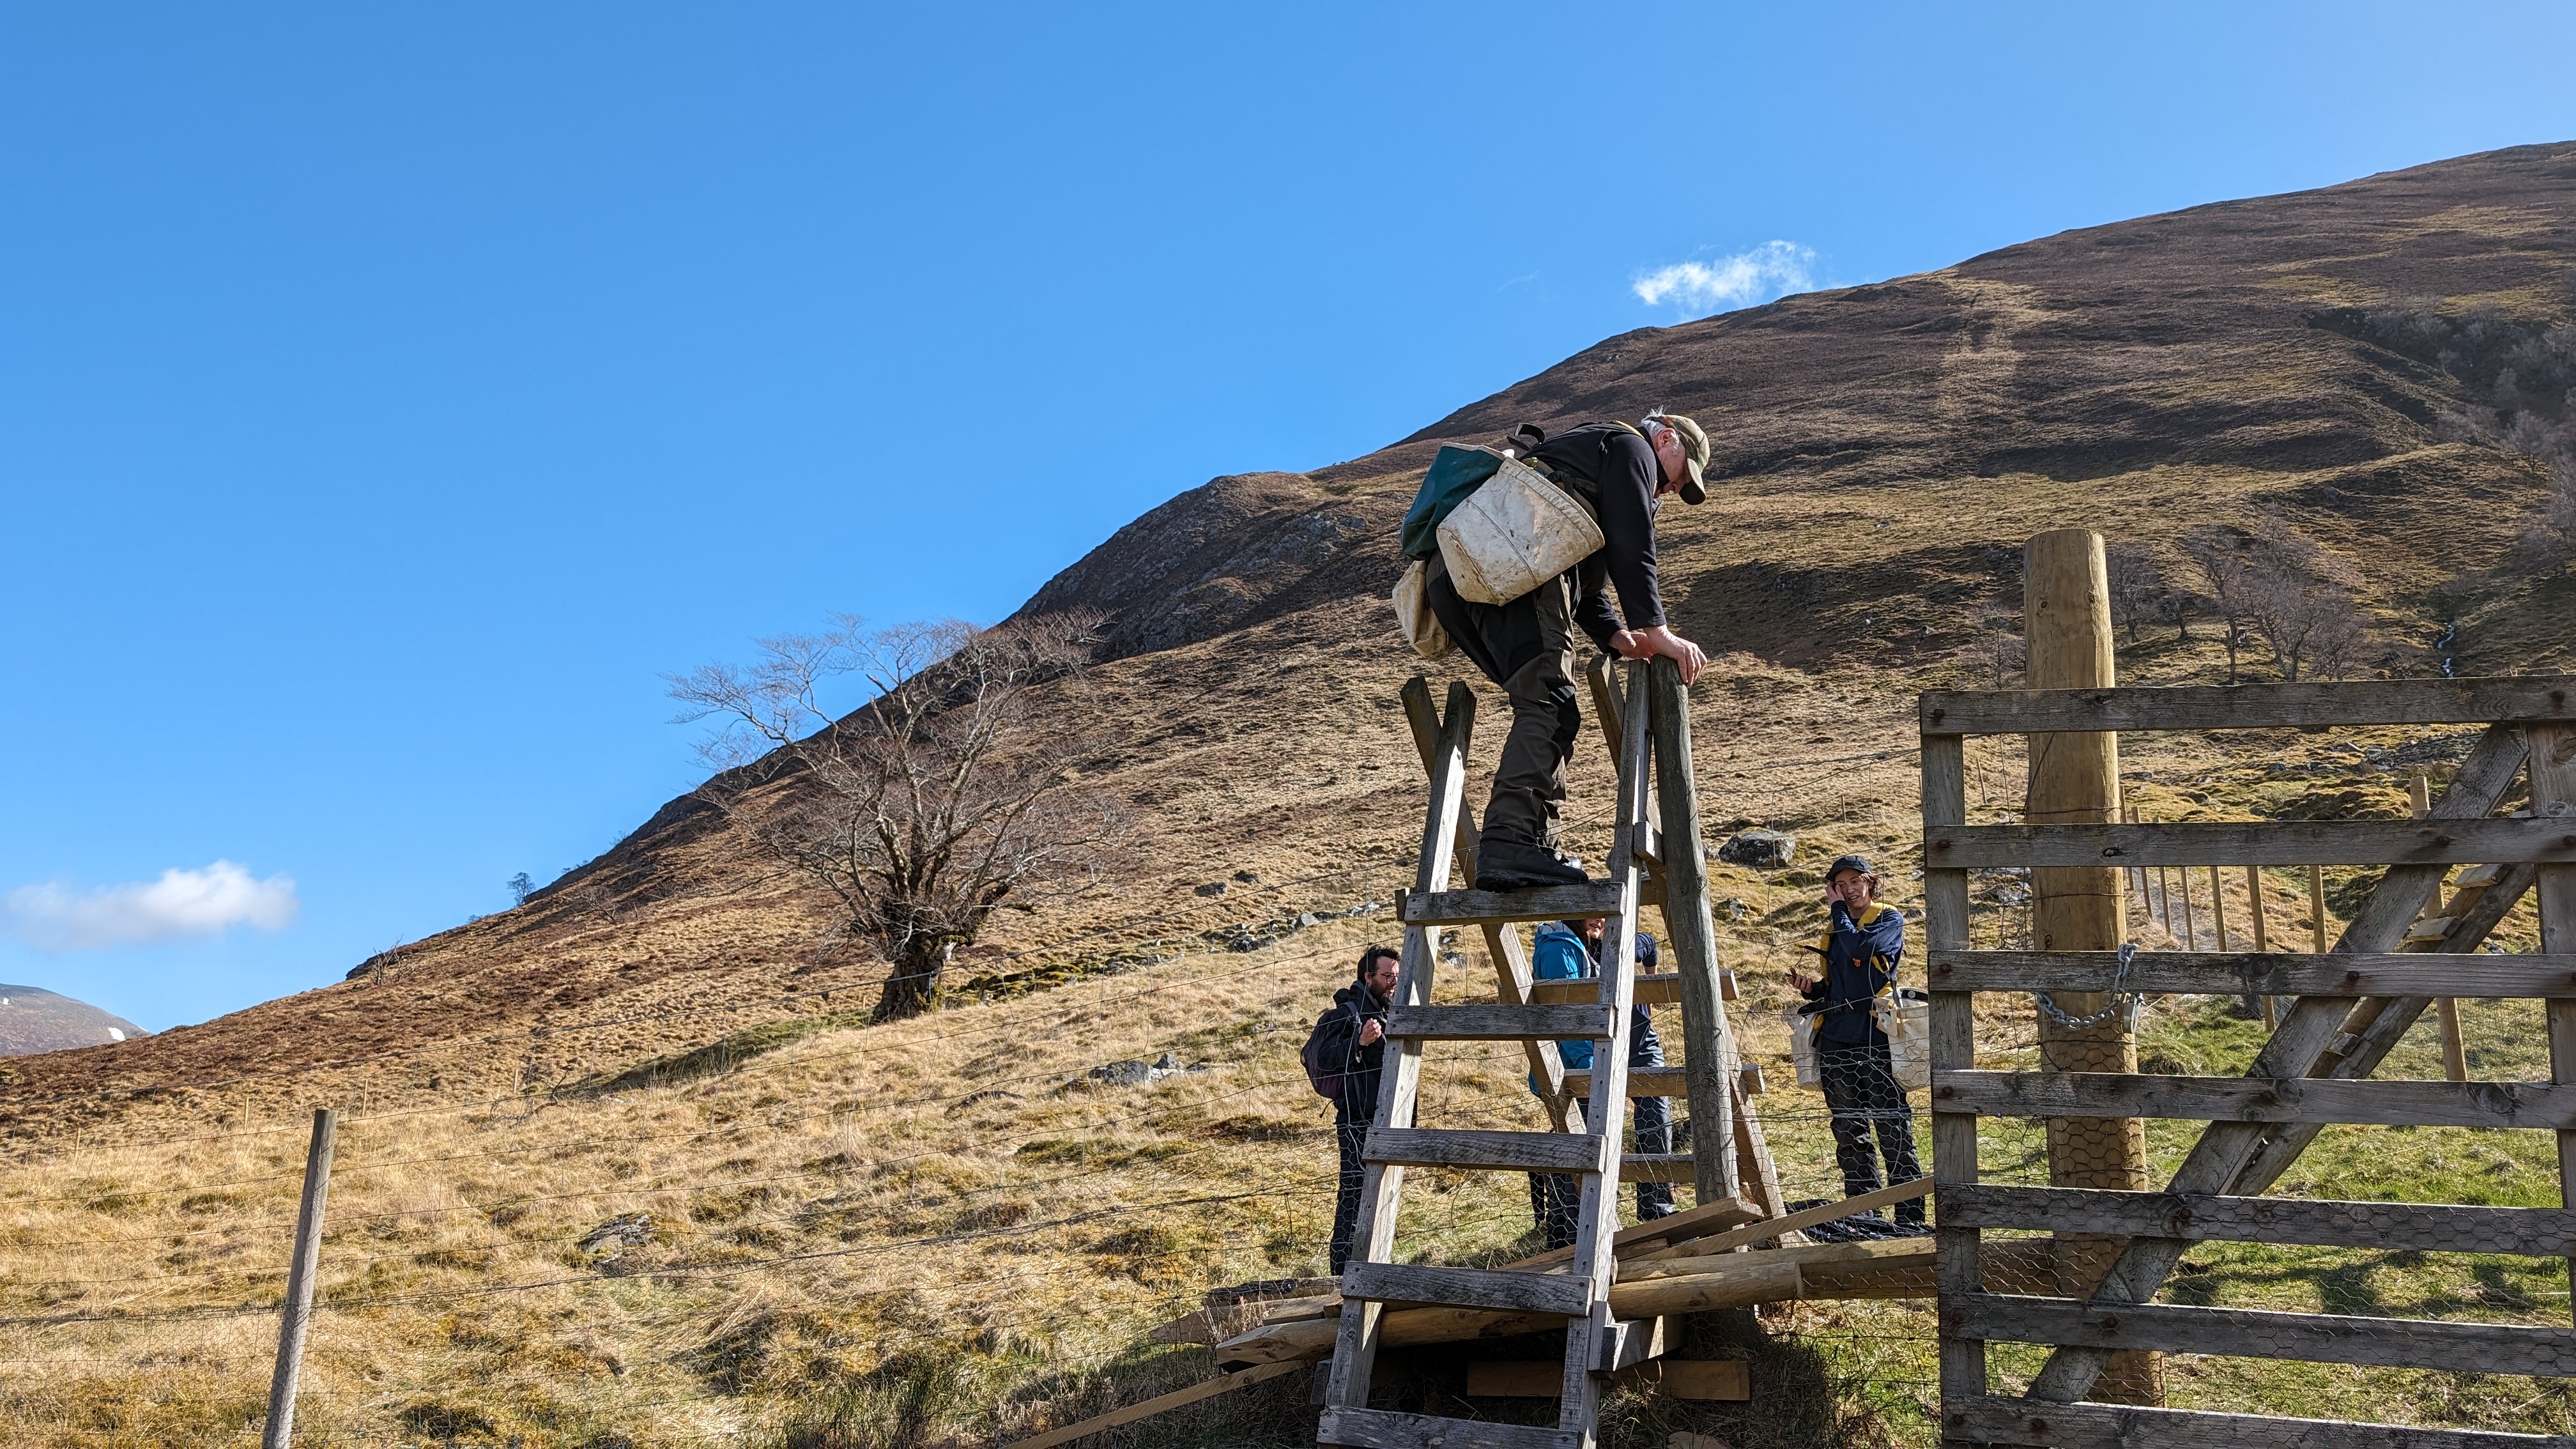 The tree planting team climbing a stile over the deer fence.